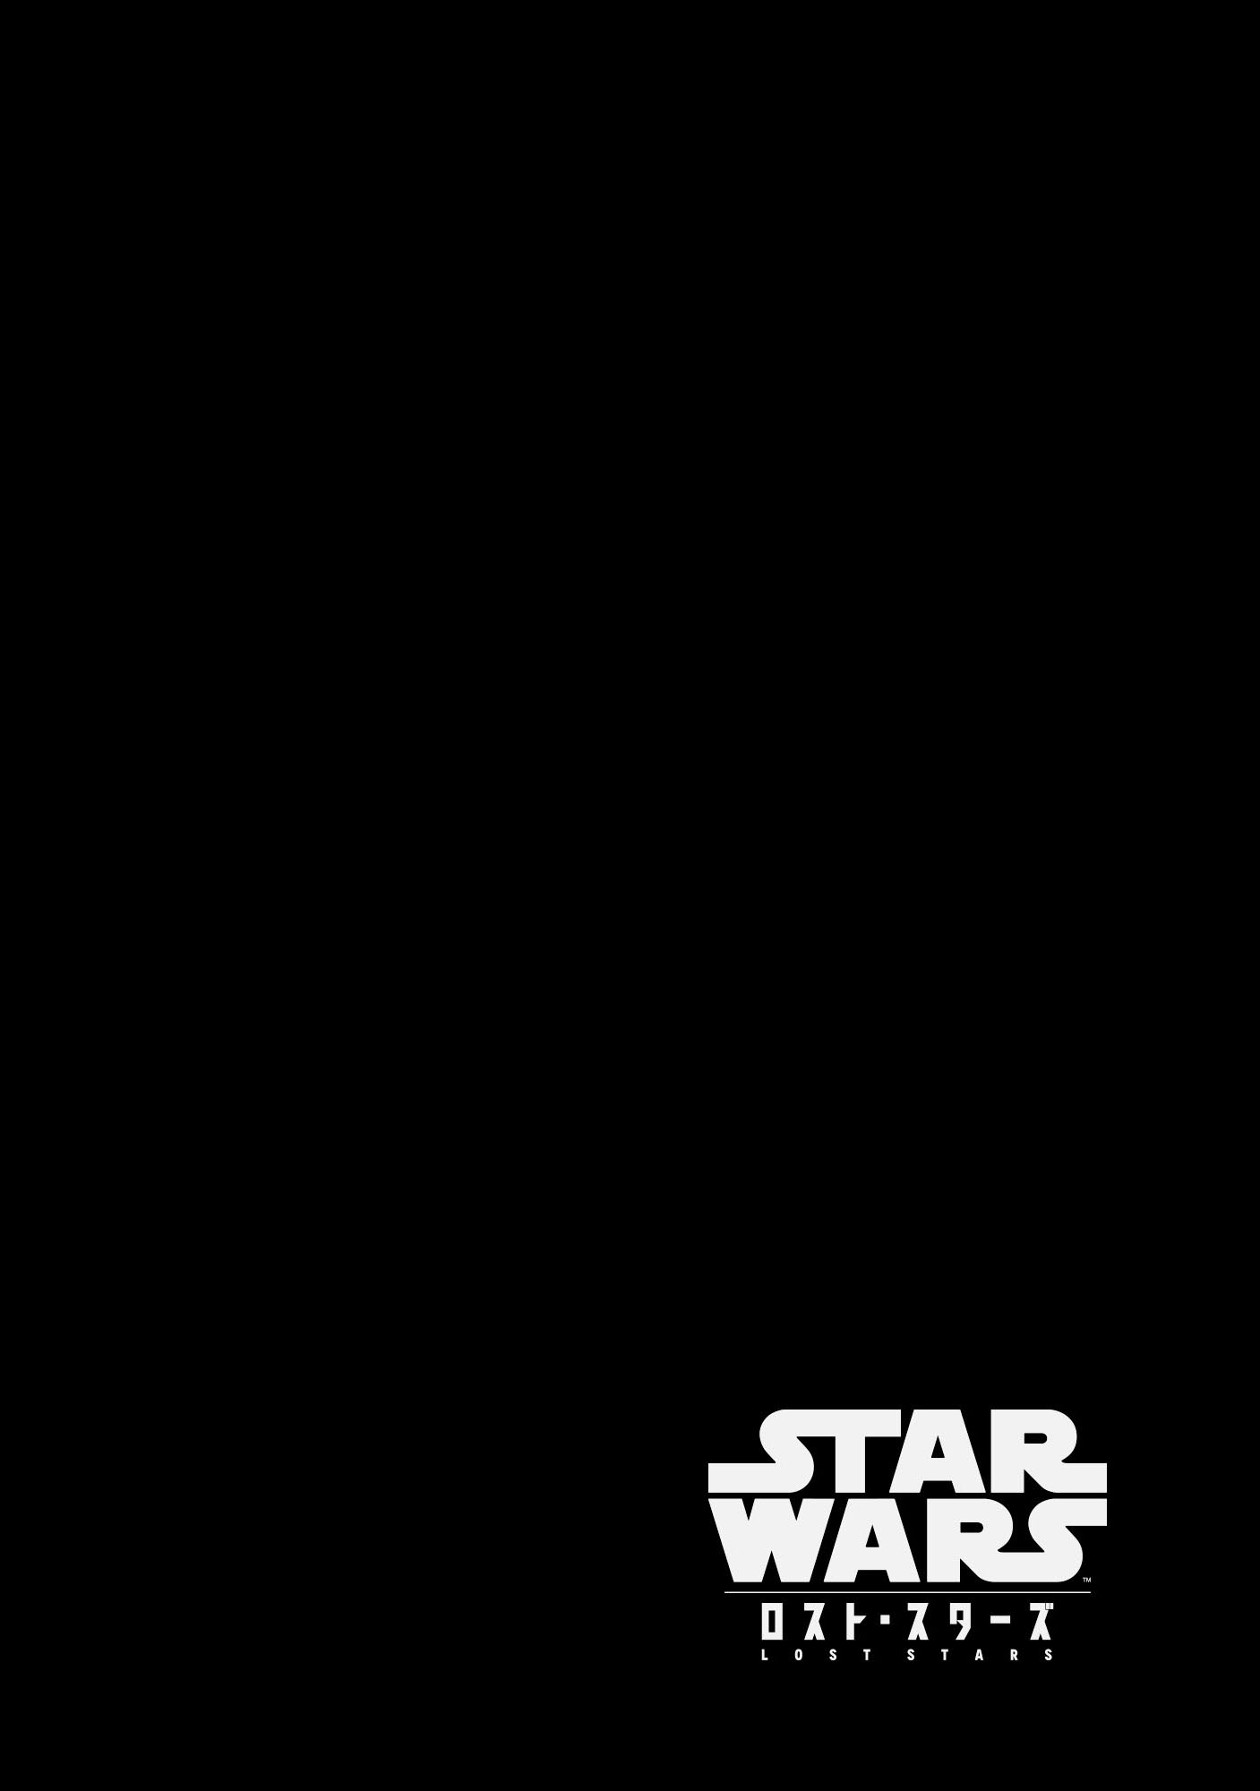 STAR WARS: Lost Stars Ch. 28.0 Next Chapter in November